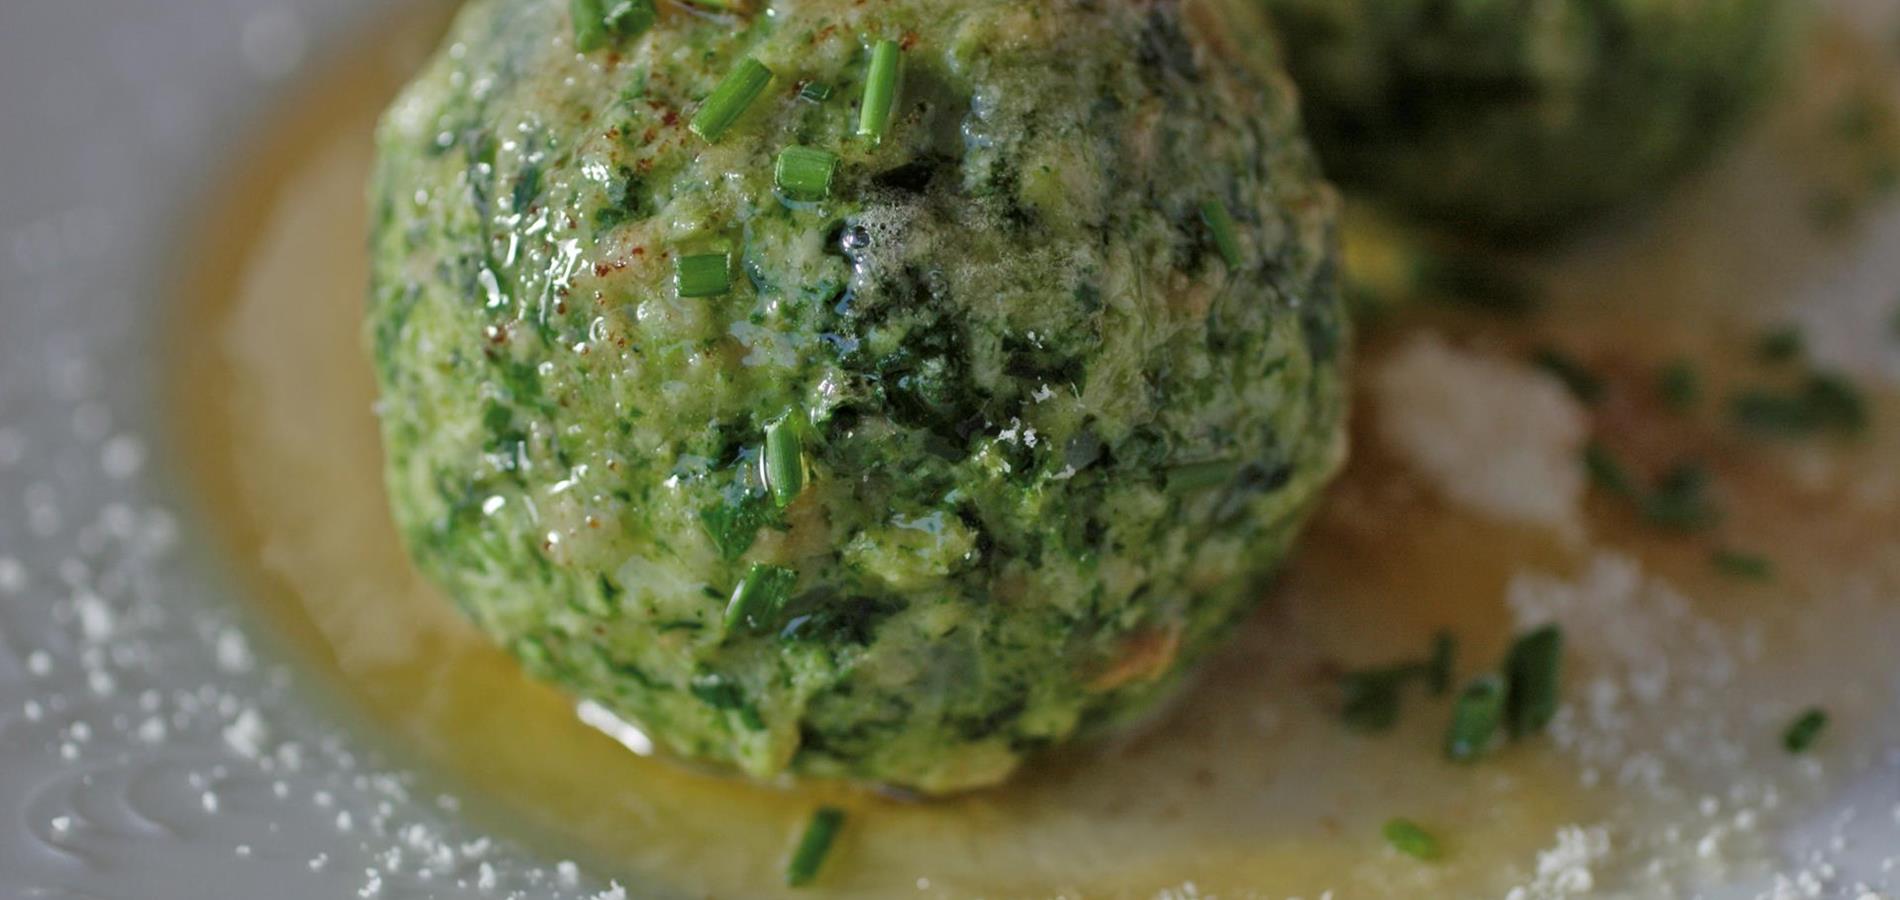 South Tyrolean spinach dumplings with butter and parmesan cheese